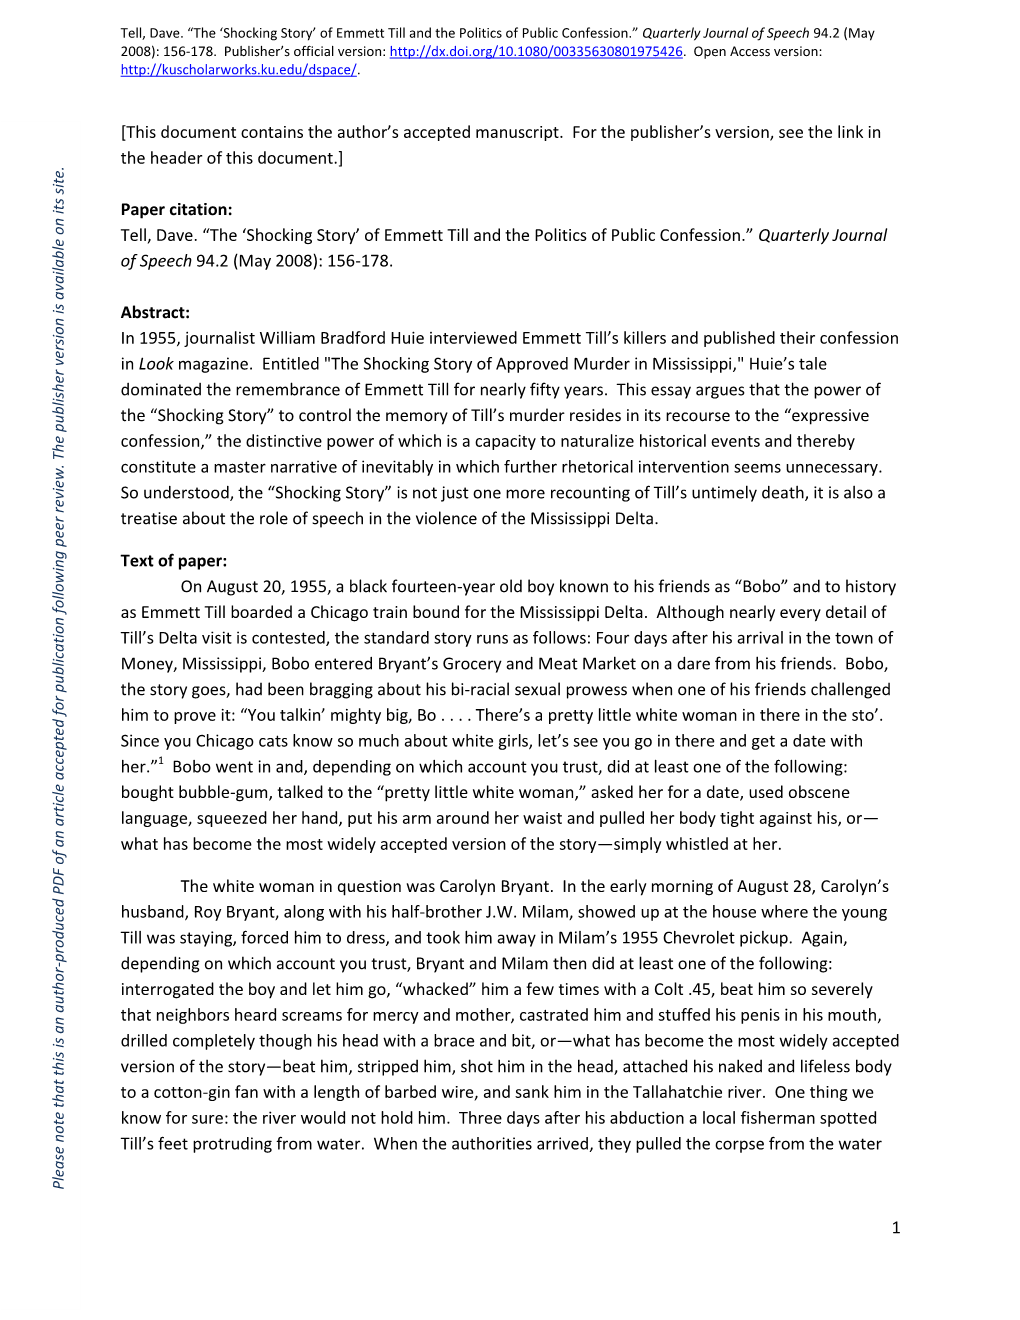 1 [This Document Contains the Author's Accepted Manuscript. for The